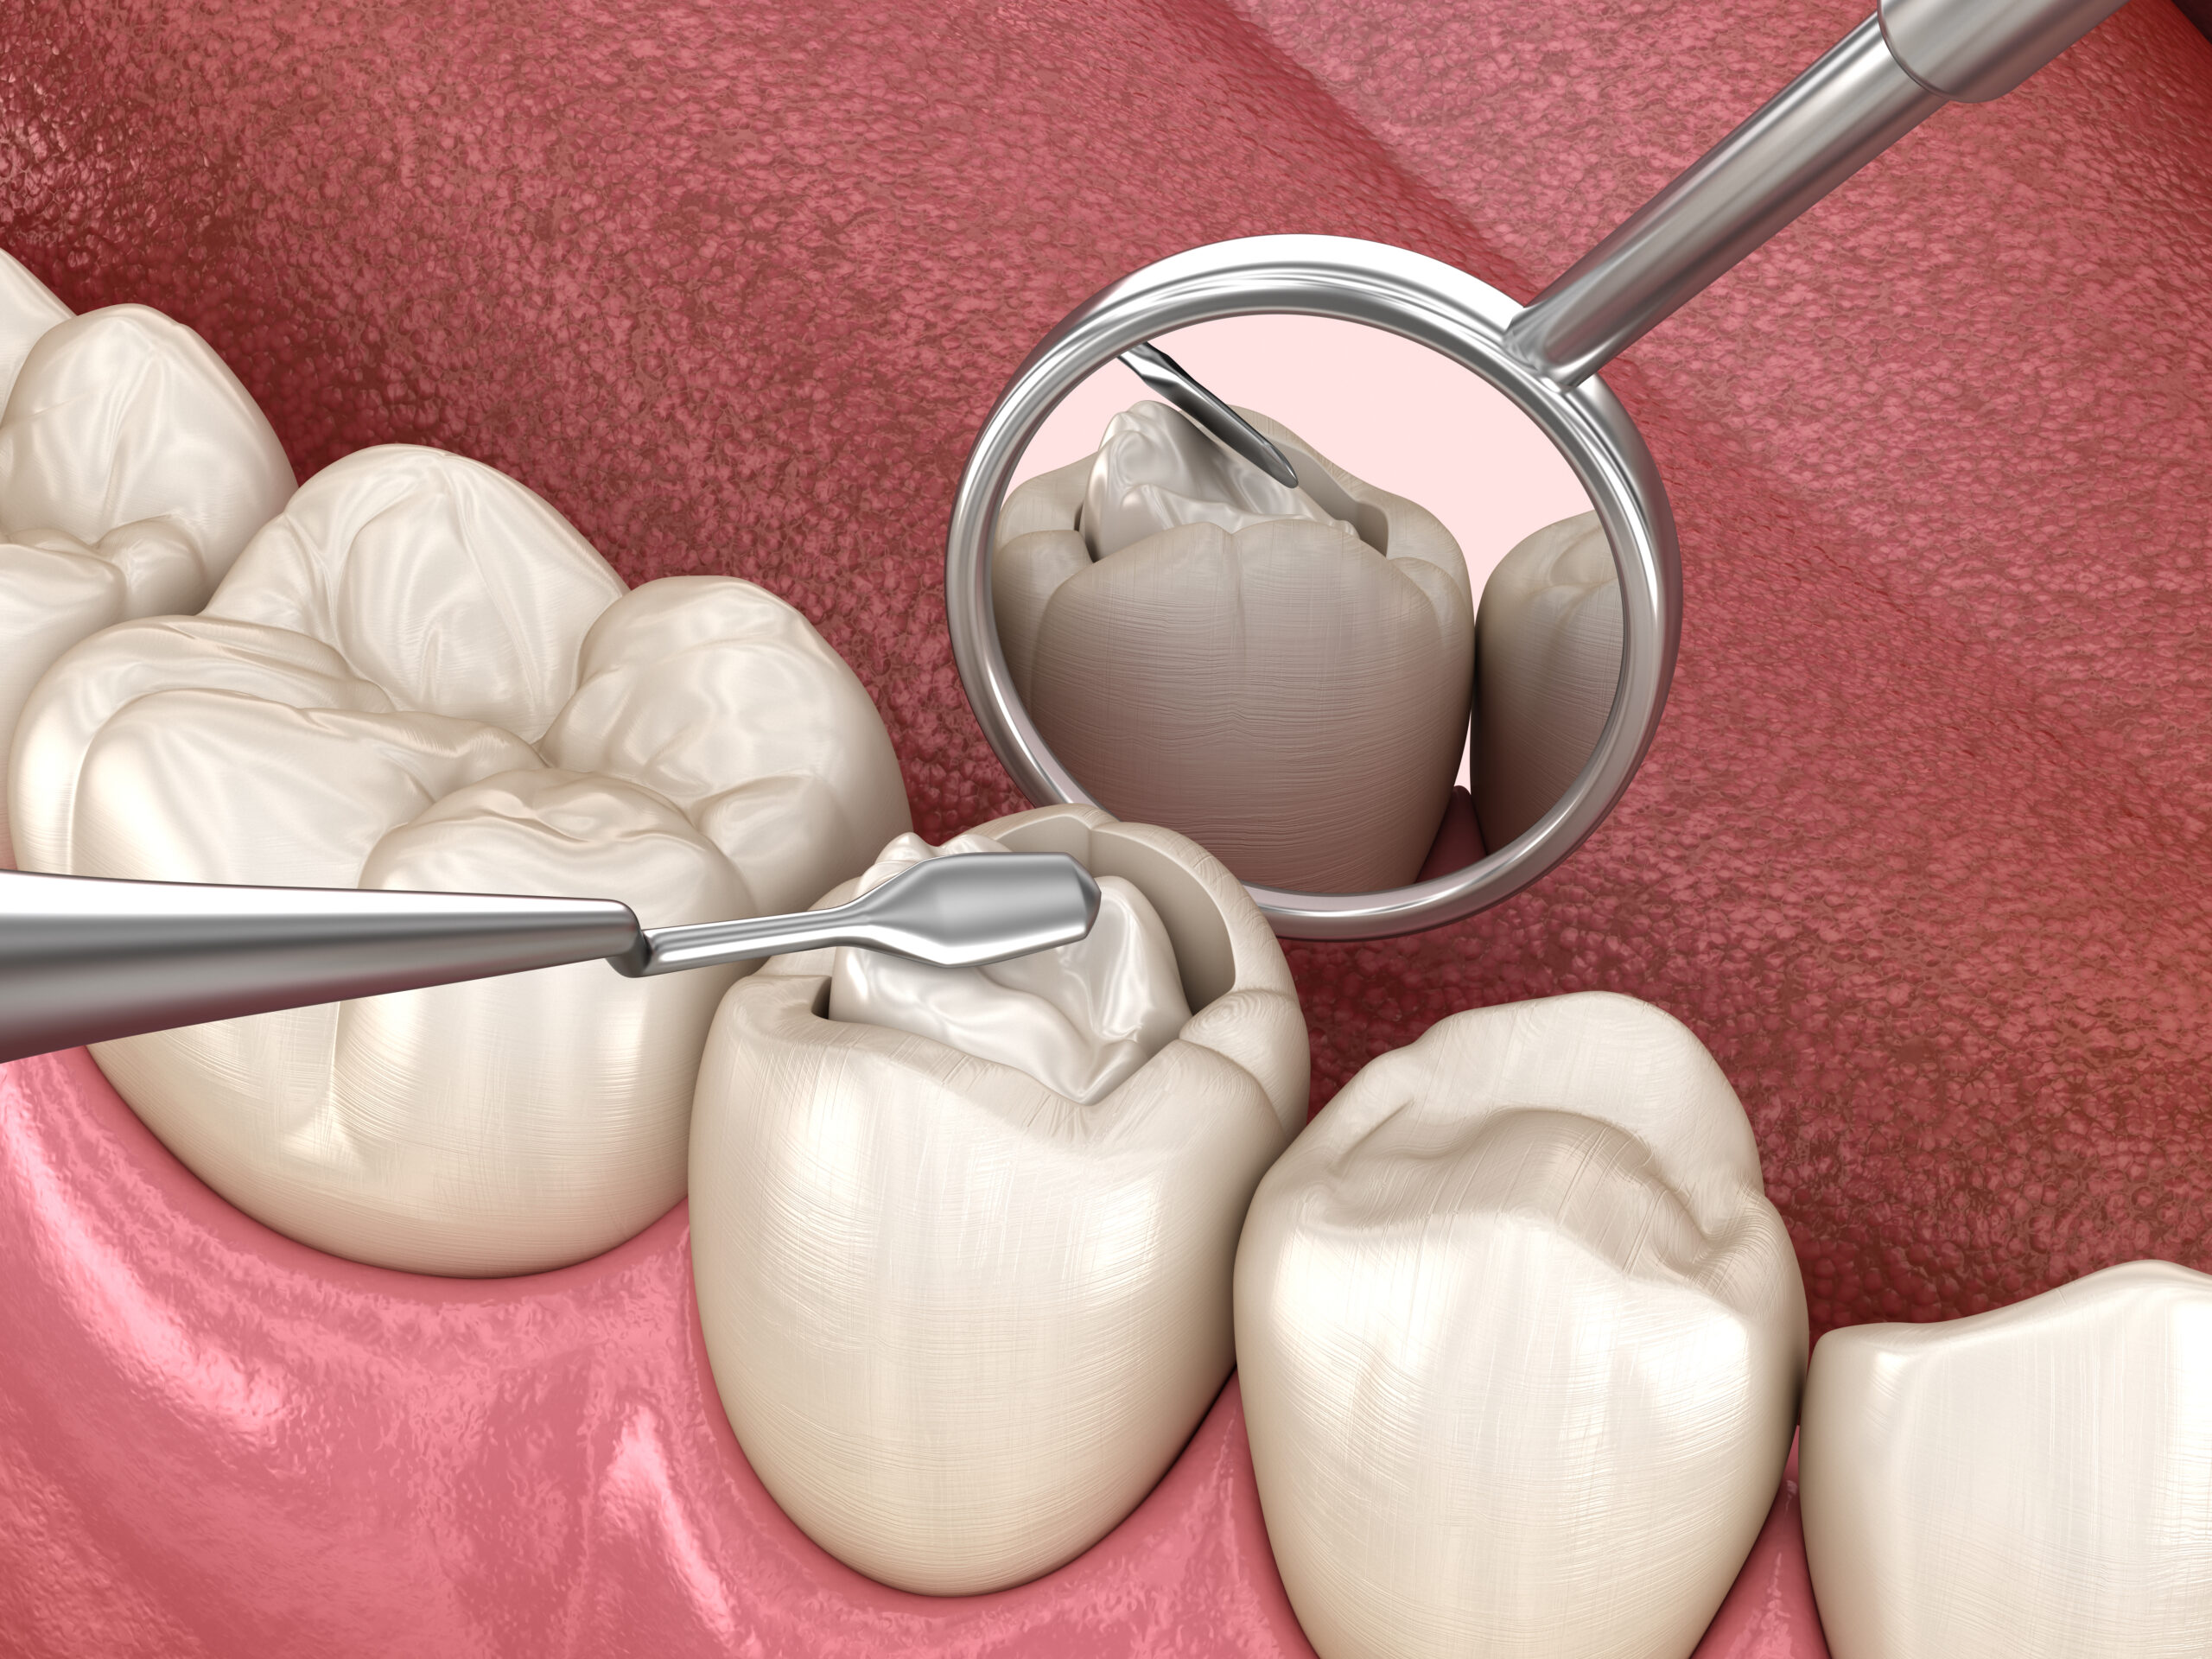 Decayed,Tooth,Restoration,With,Composite,Filling.,Medically,Accurate,Tooth,3d